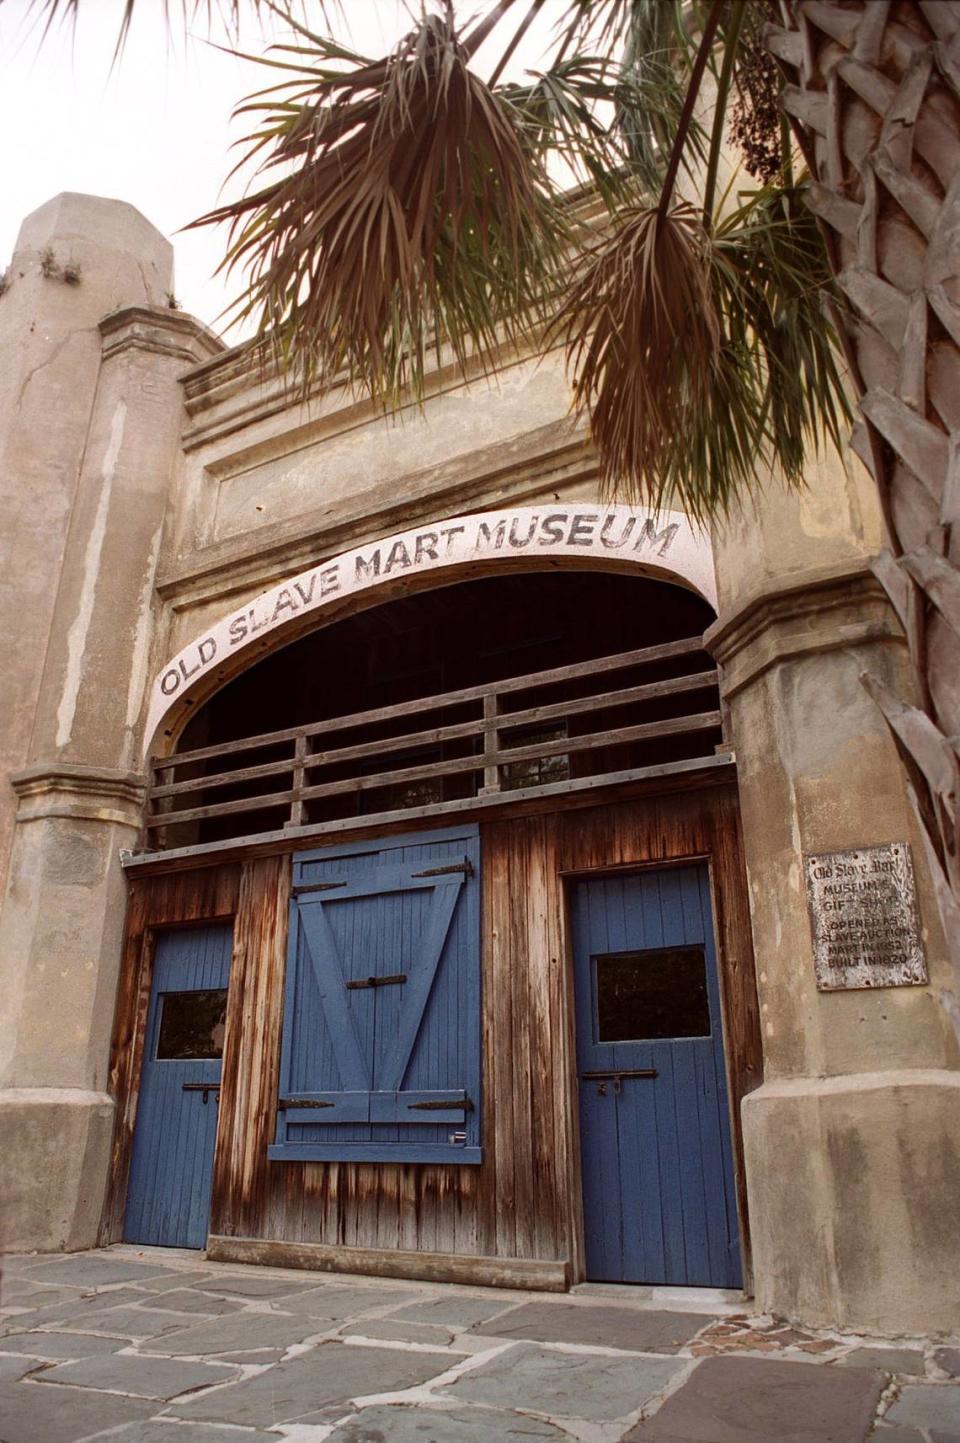 The entrance to the Slave Market and Museum in Charleston, South Carolina.